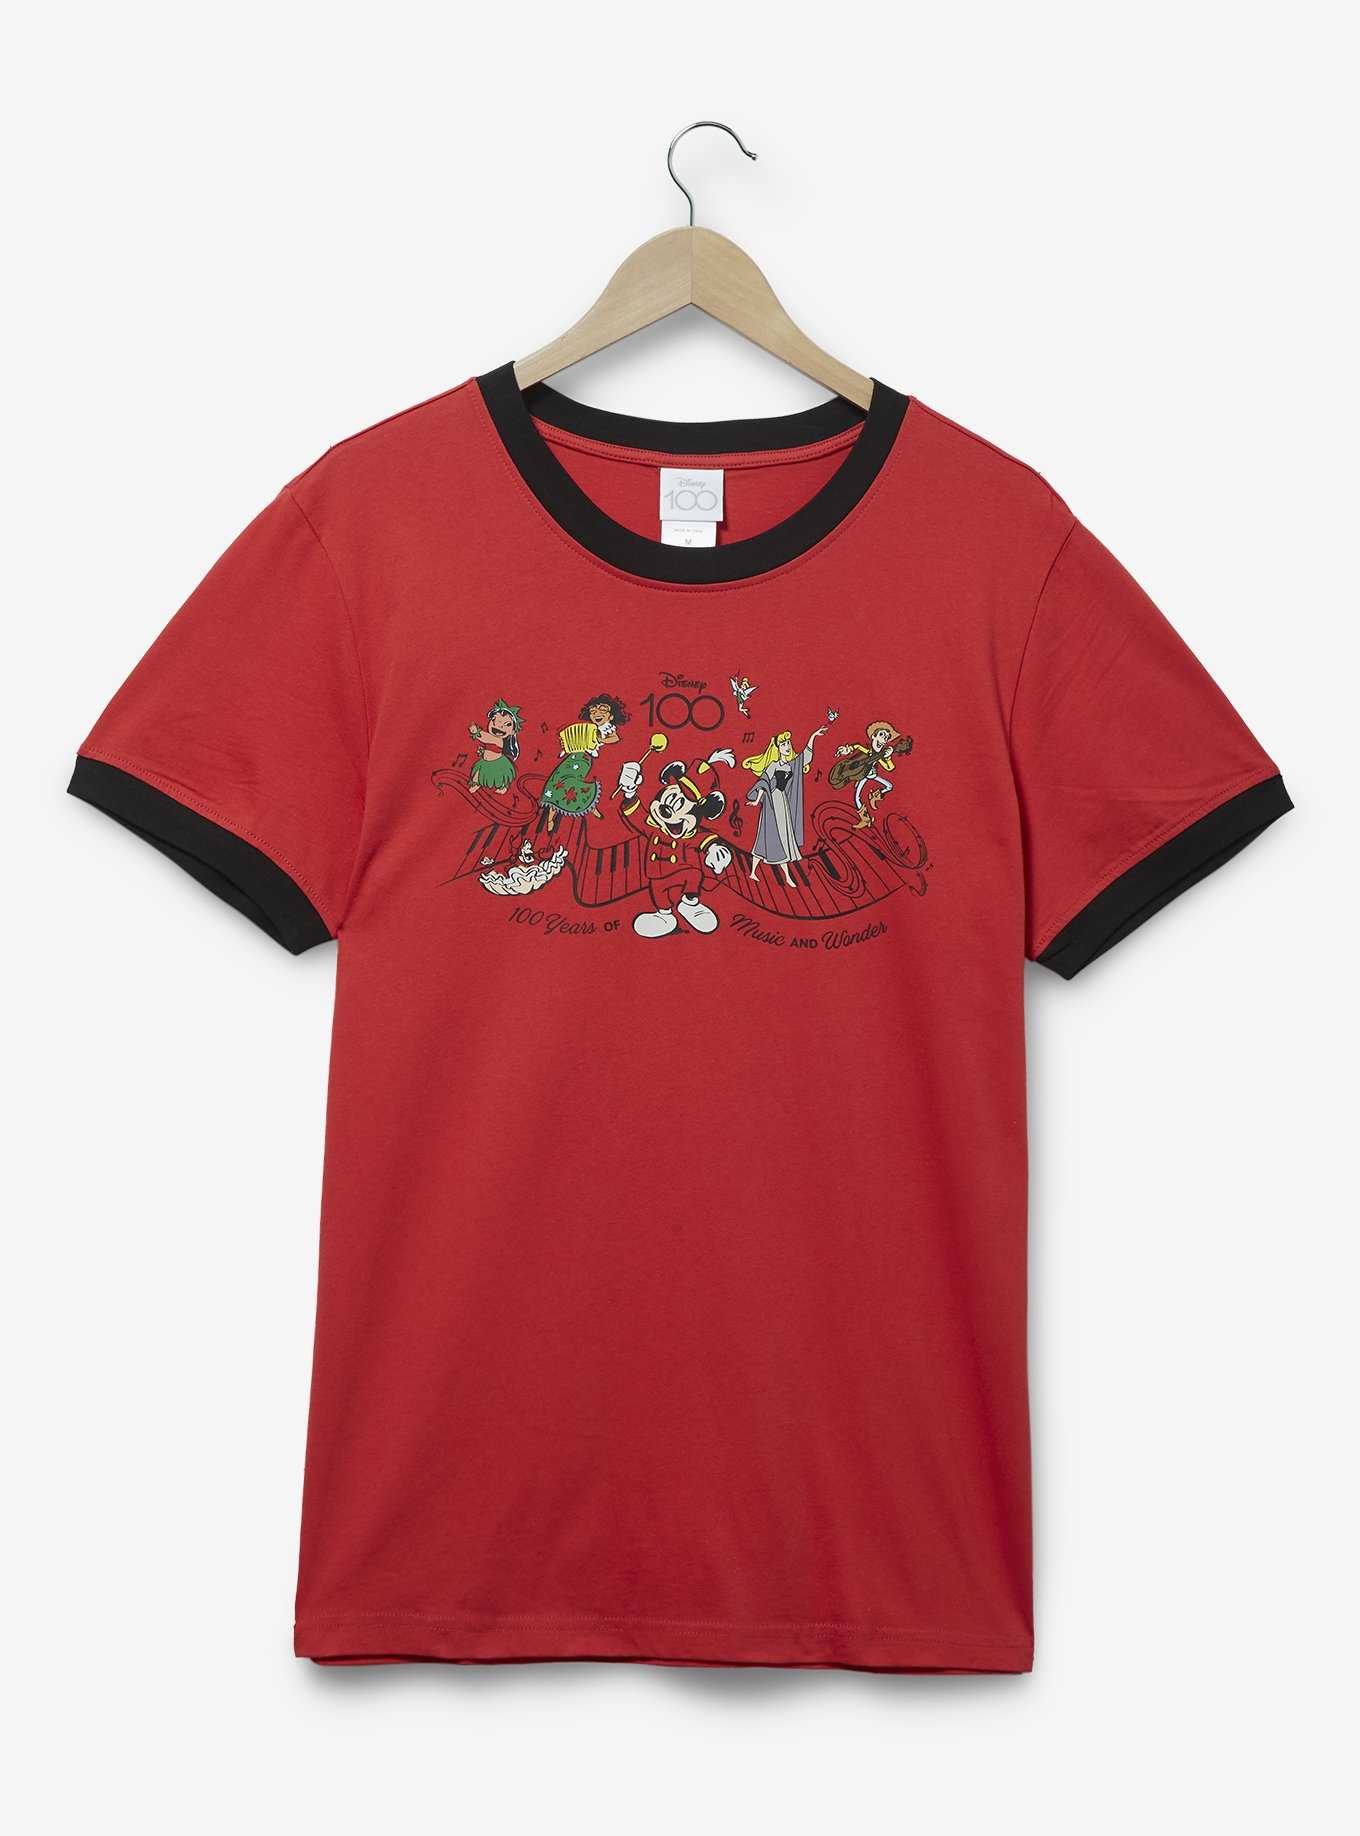 OFFICIAL Disney Graphic Tees & Shirts | BoxLunch